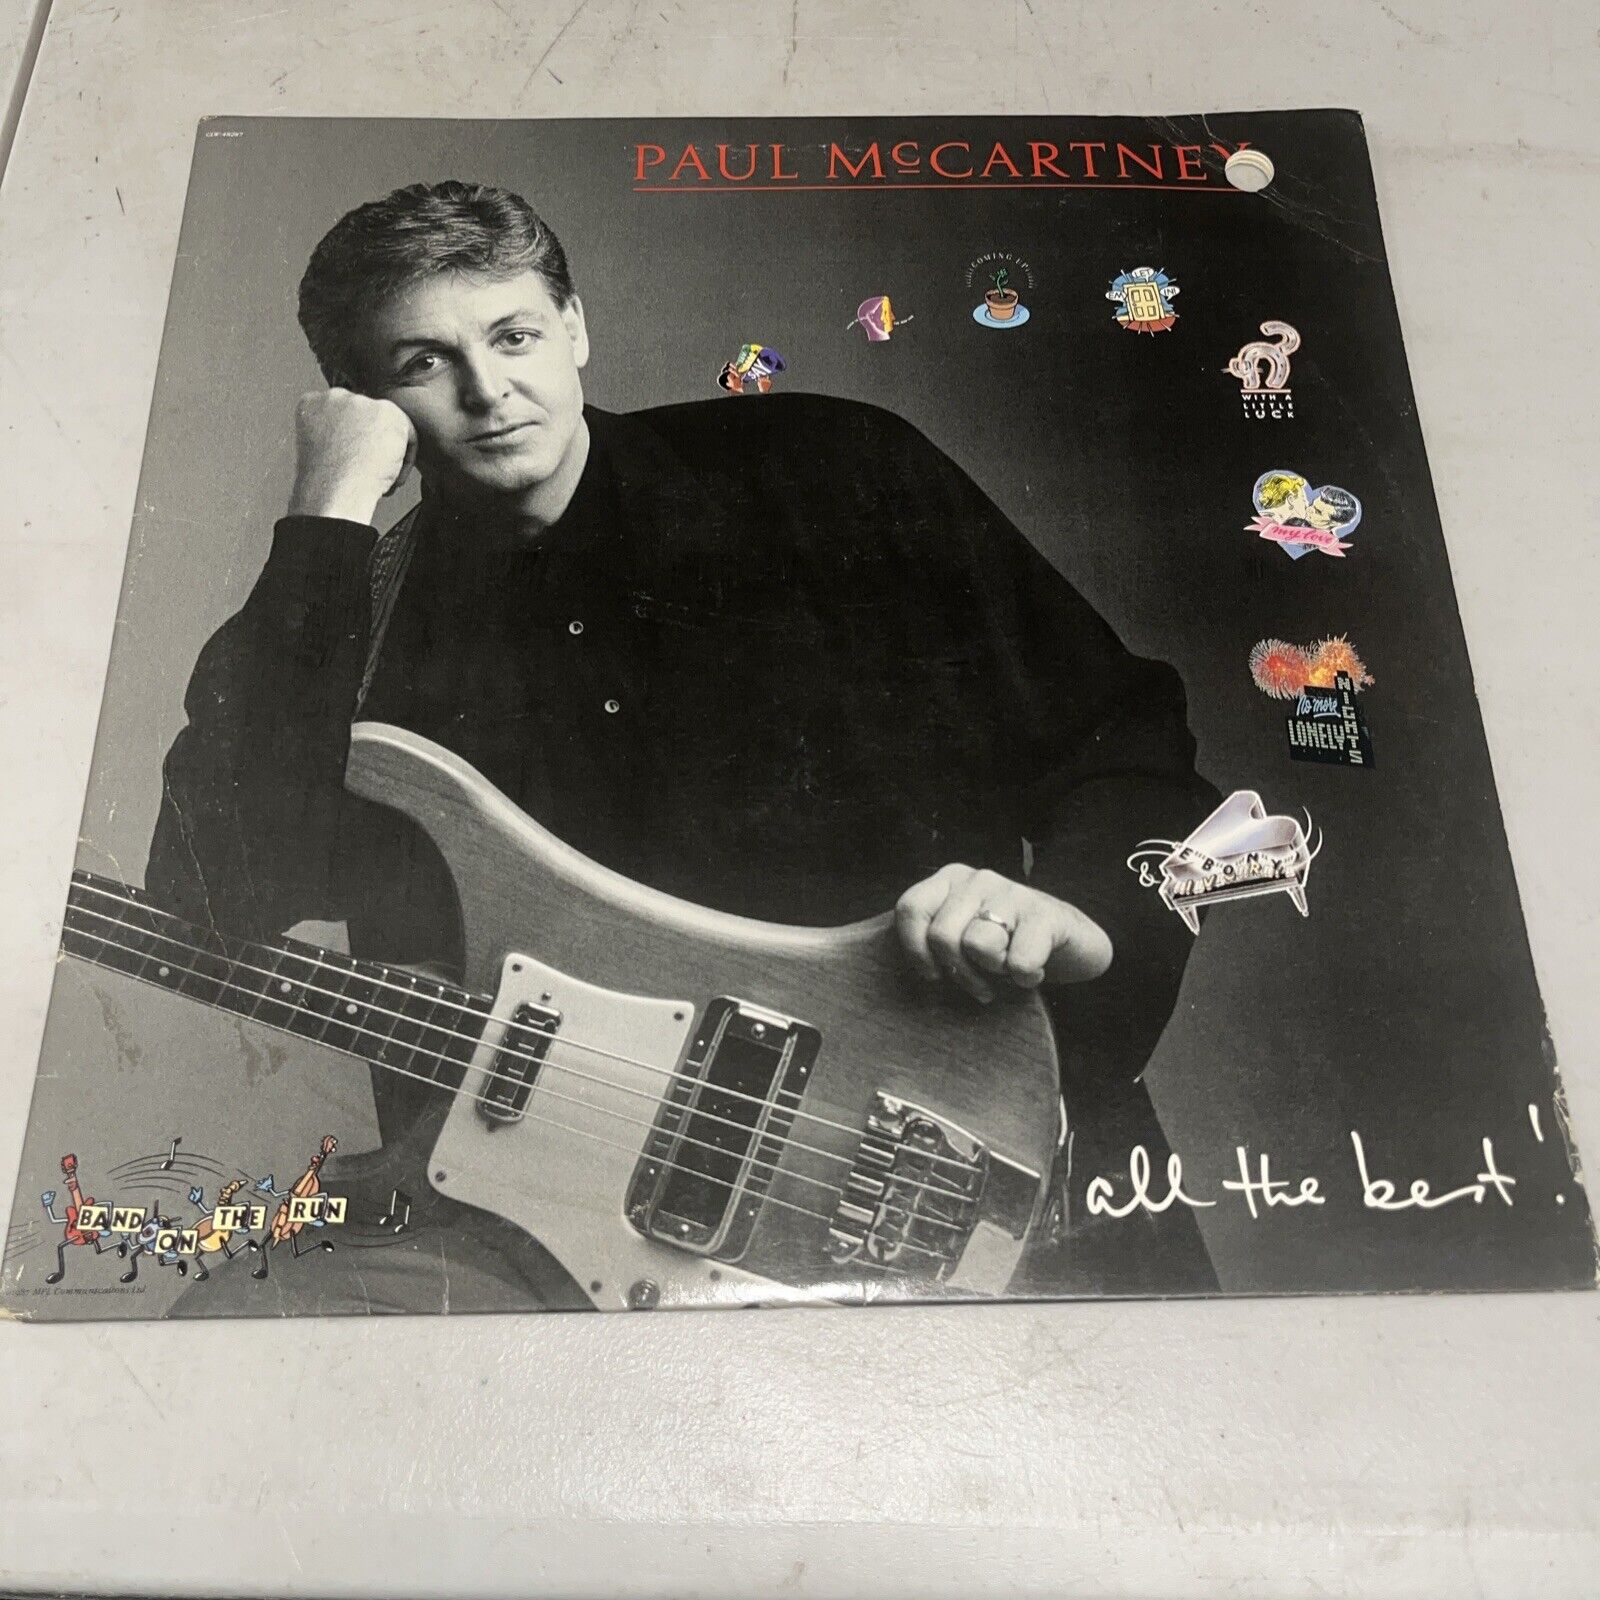 Paul McCartney all the best Vinyl Record CLW 48287